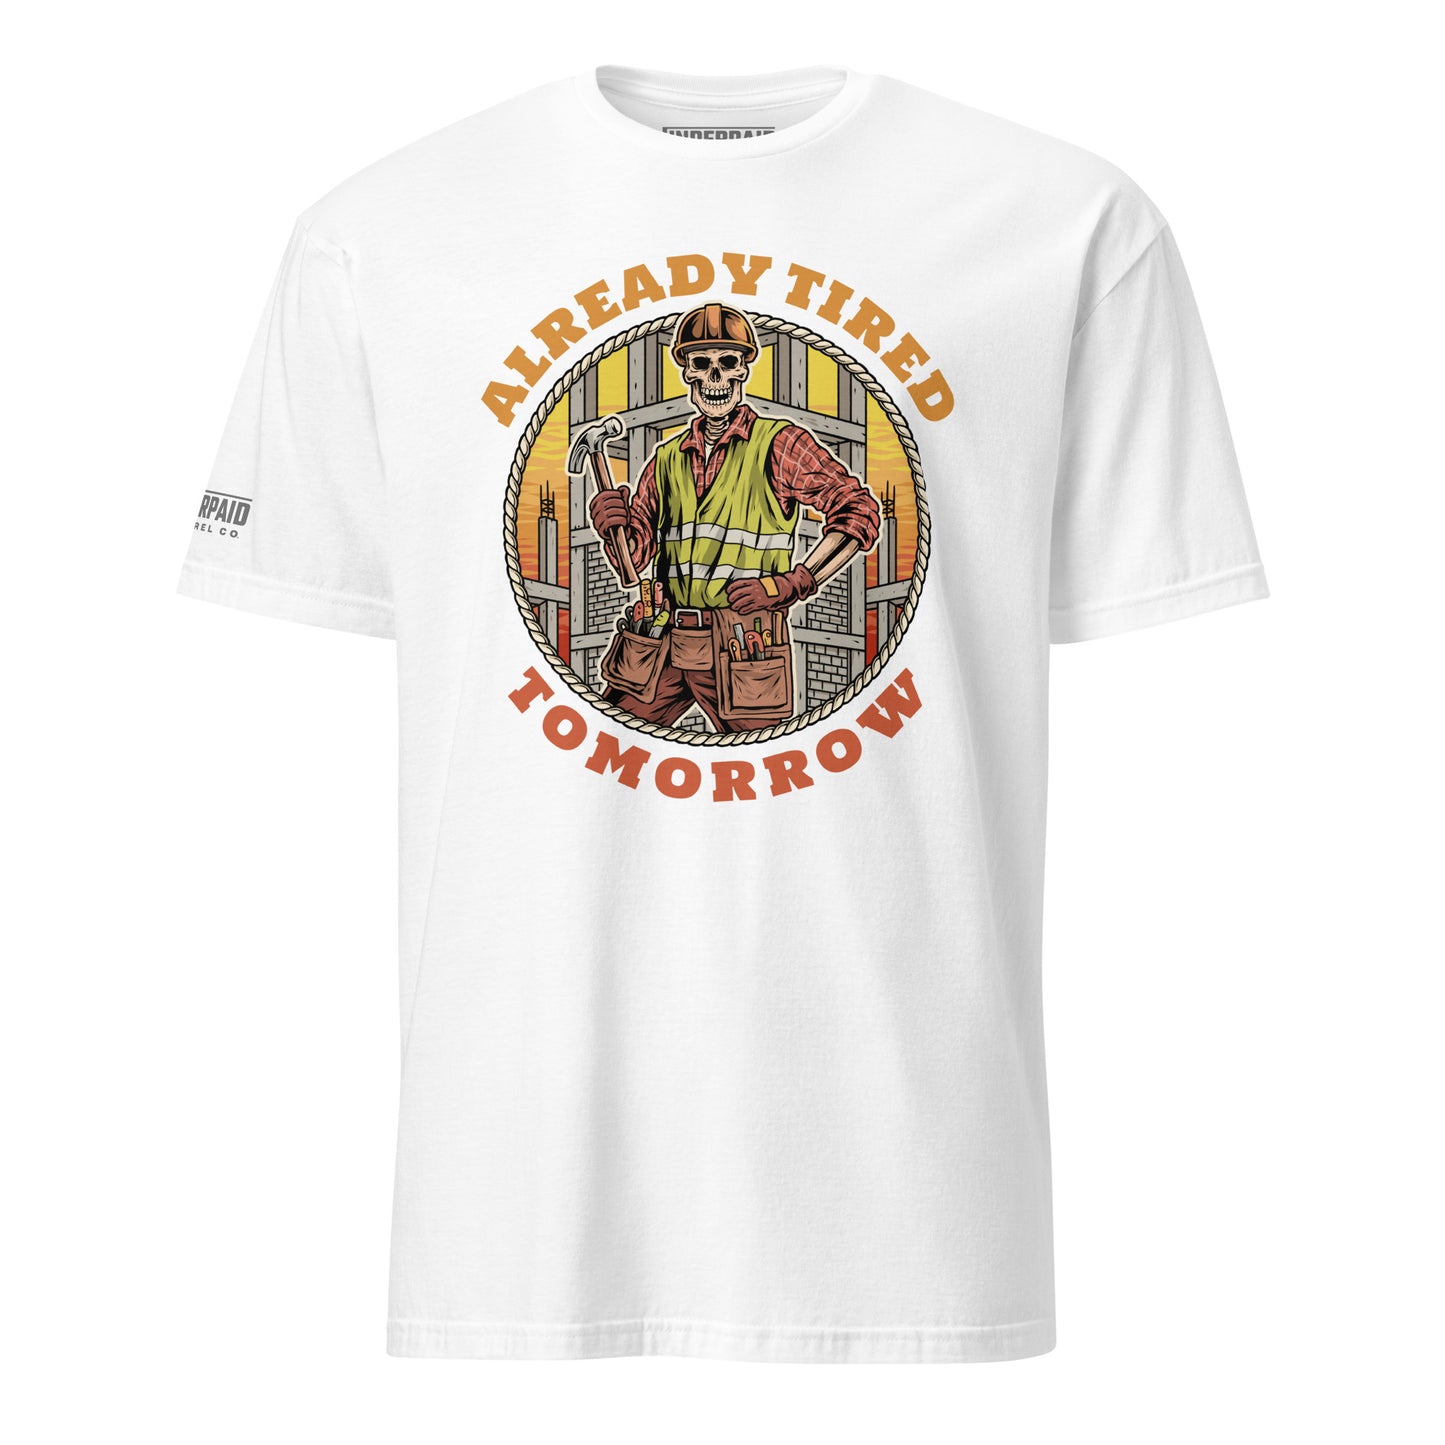 Tired Tomorrow Tee featuring full-color graphic design